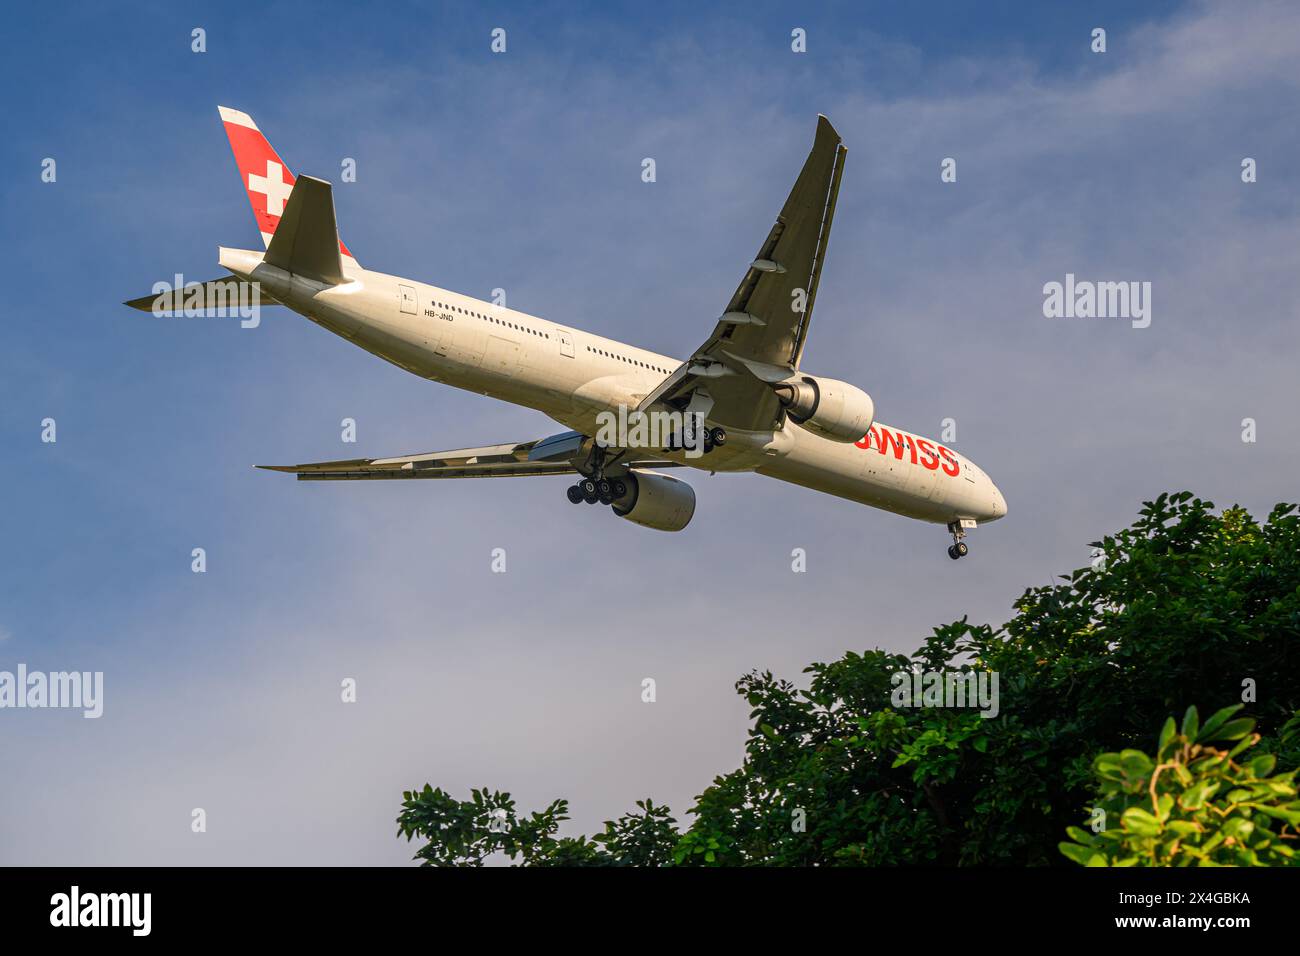 Swiss, Boeing 777-300ER, HB-JND, on final approach to Singapore Changi airport Stock Photo